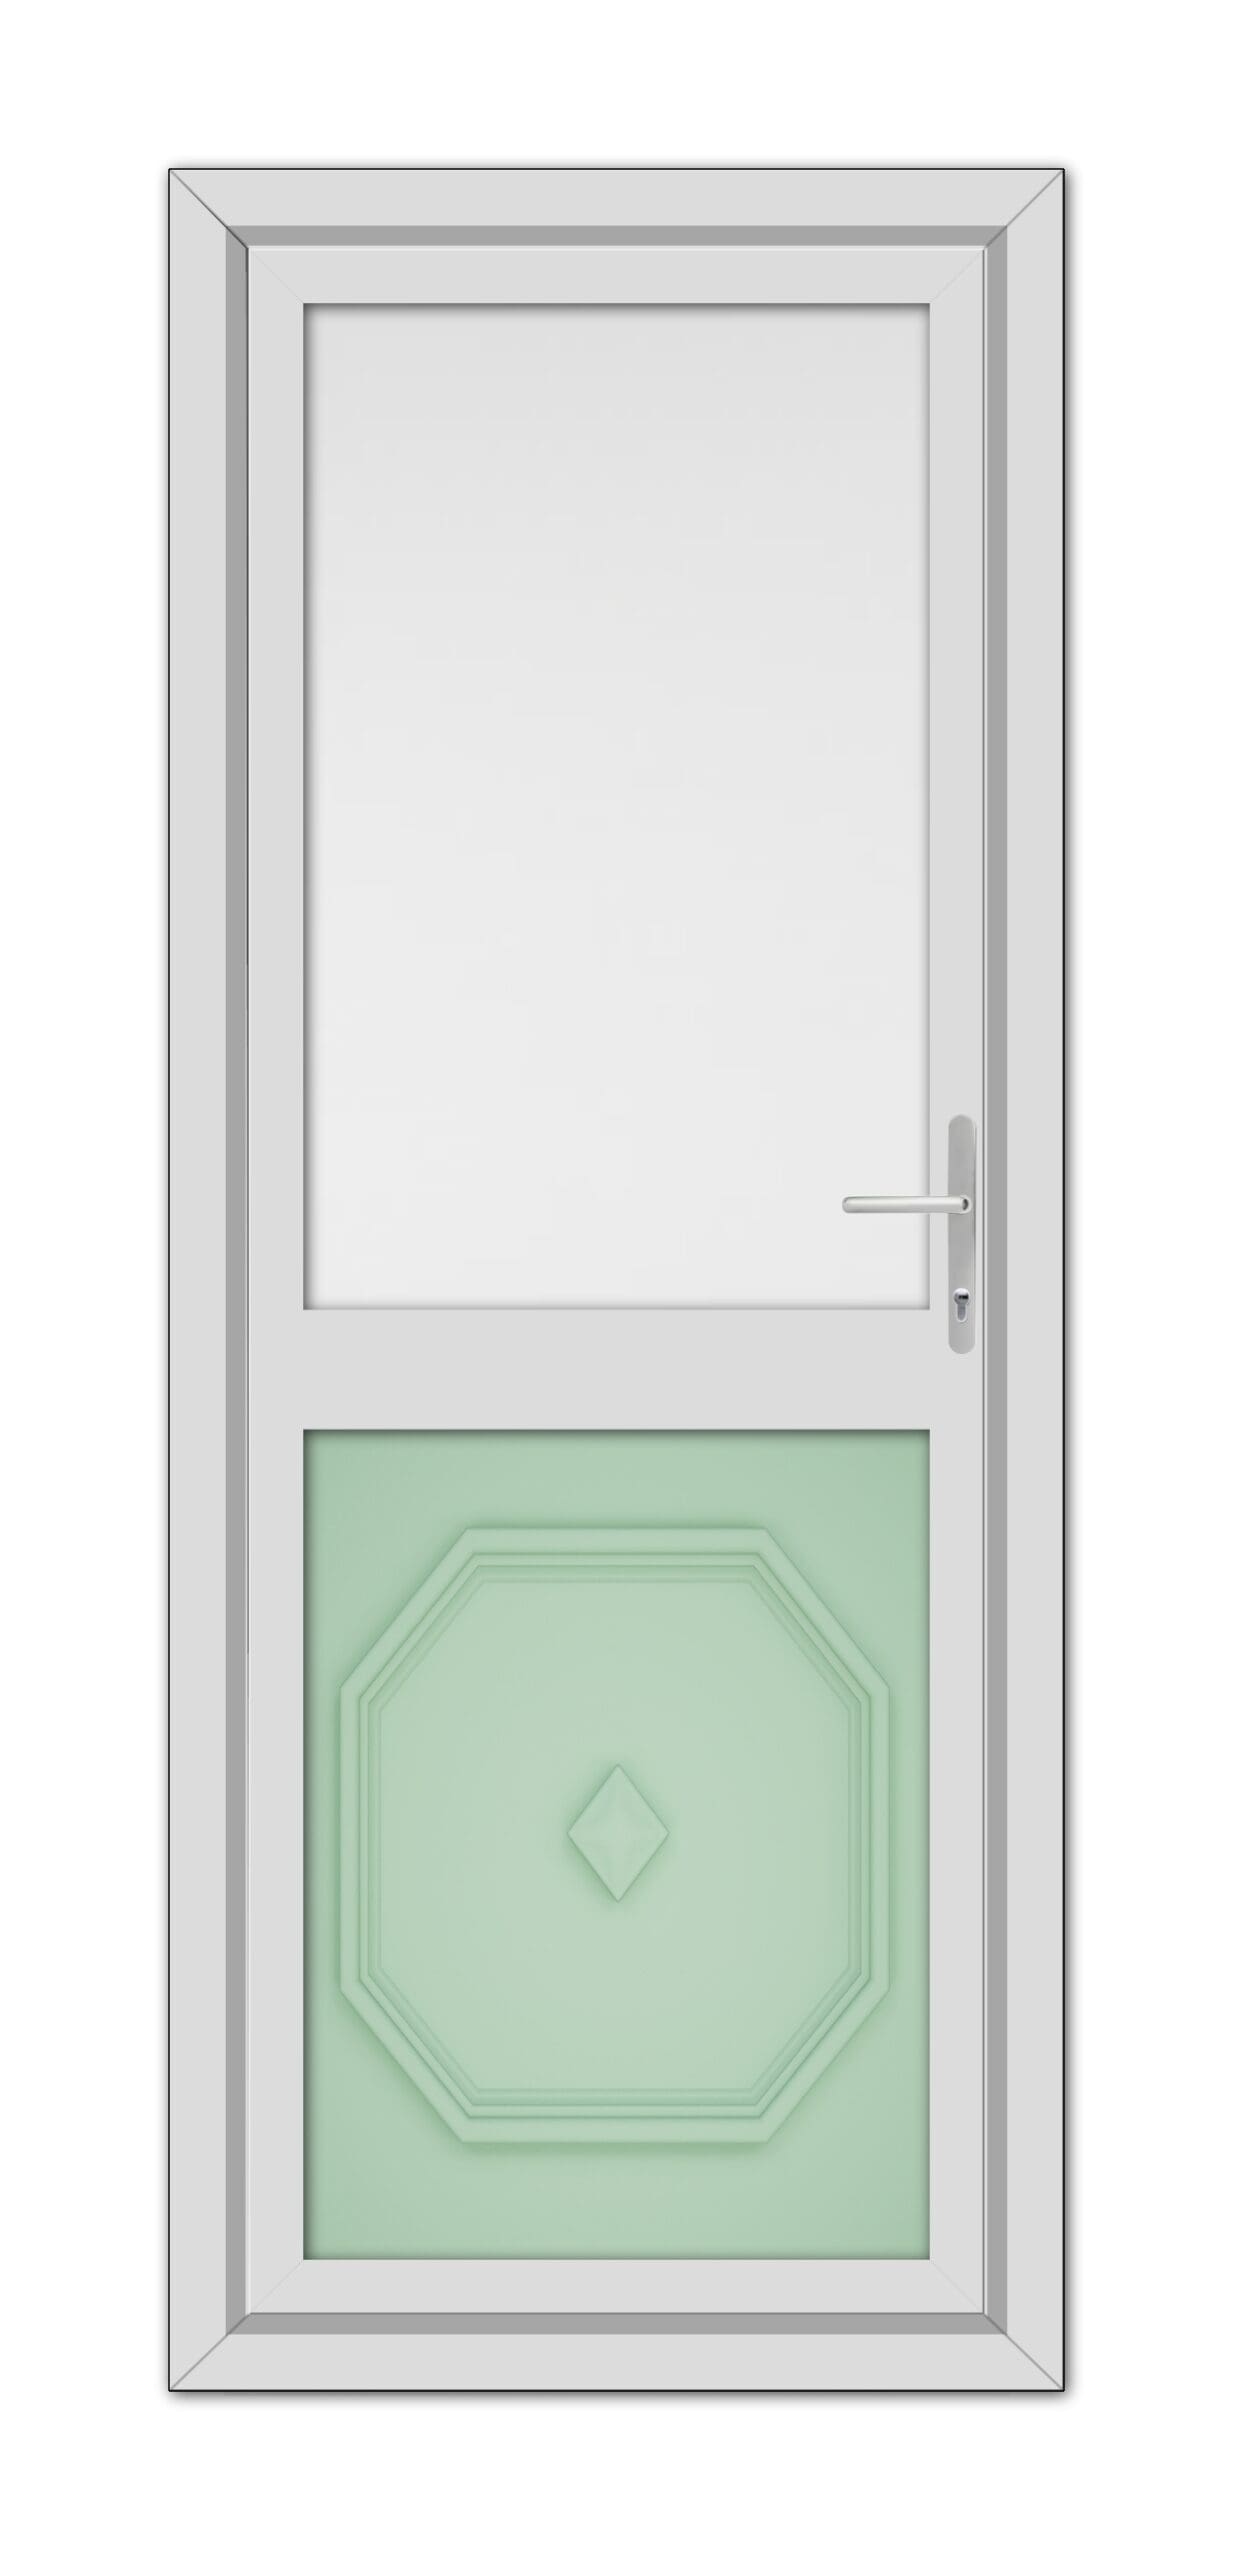 A modern door featuring a Chartwell Green Westminster Half uPVC lower panel with a hexagonal design and a simple upper glass window, surrounded by a white frame.